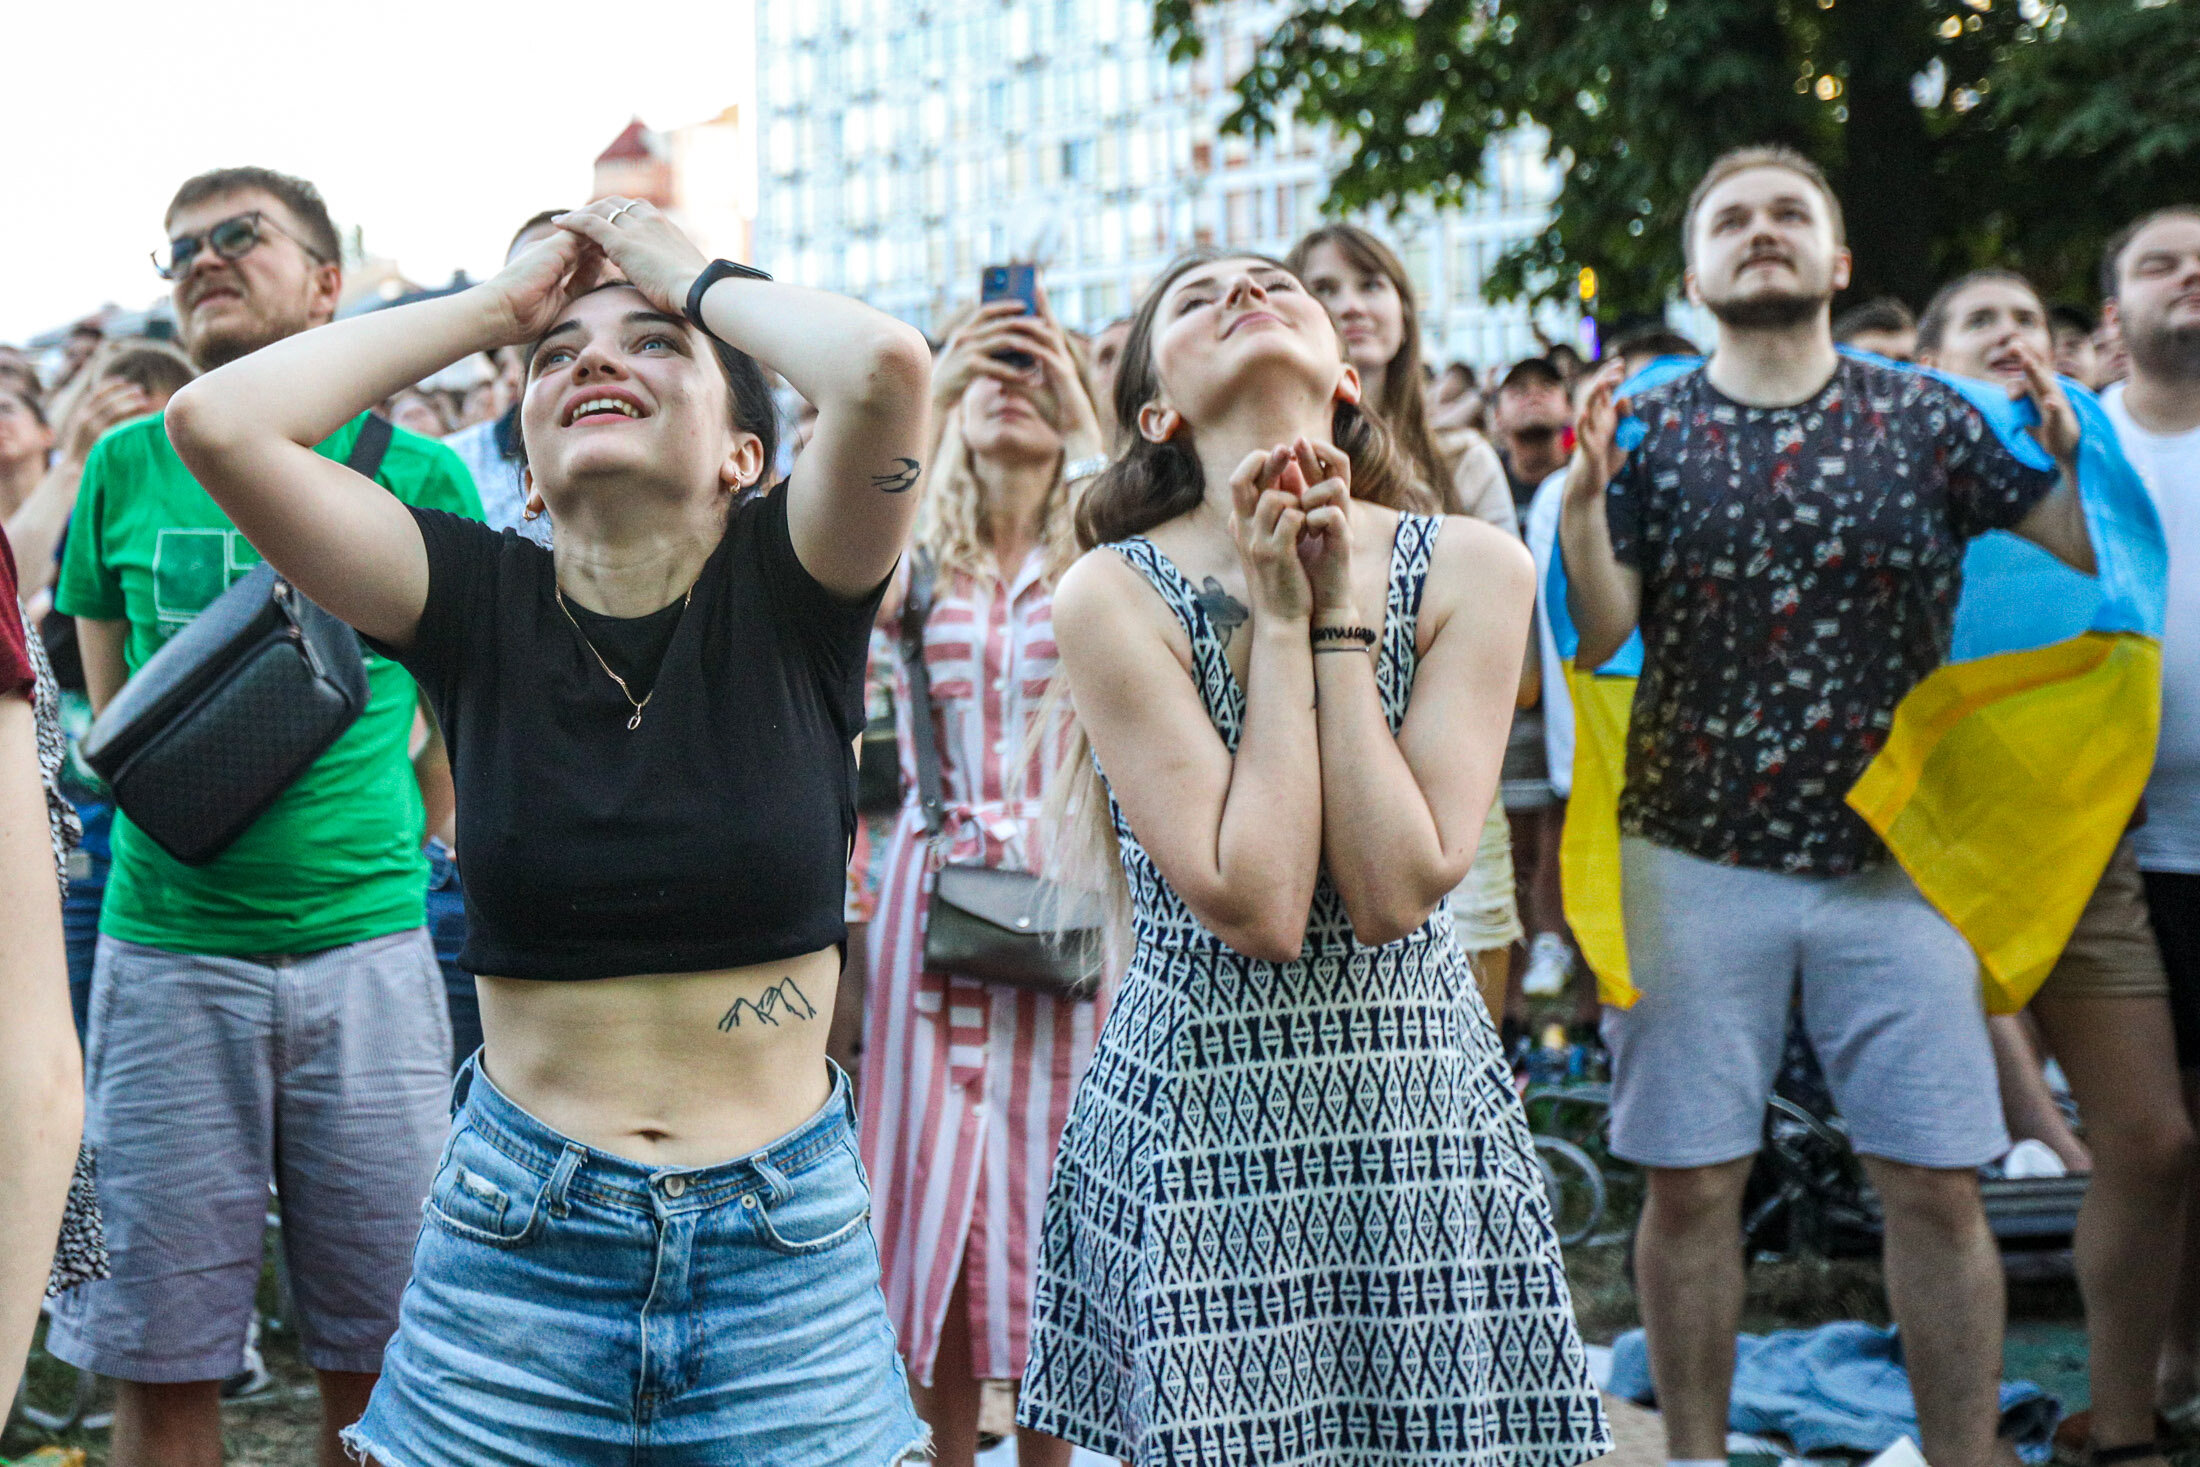 Ukrainian supporters reacts as they watch the  UEFA EURO 2020 Group C football match between Ukraine and Austria on a giant screen in the center of Kyiv on June 21, 2021.